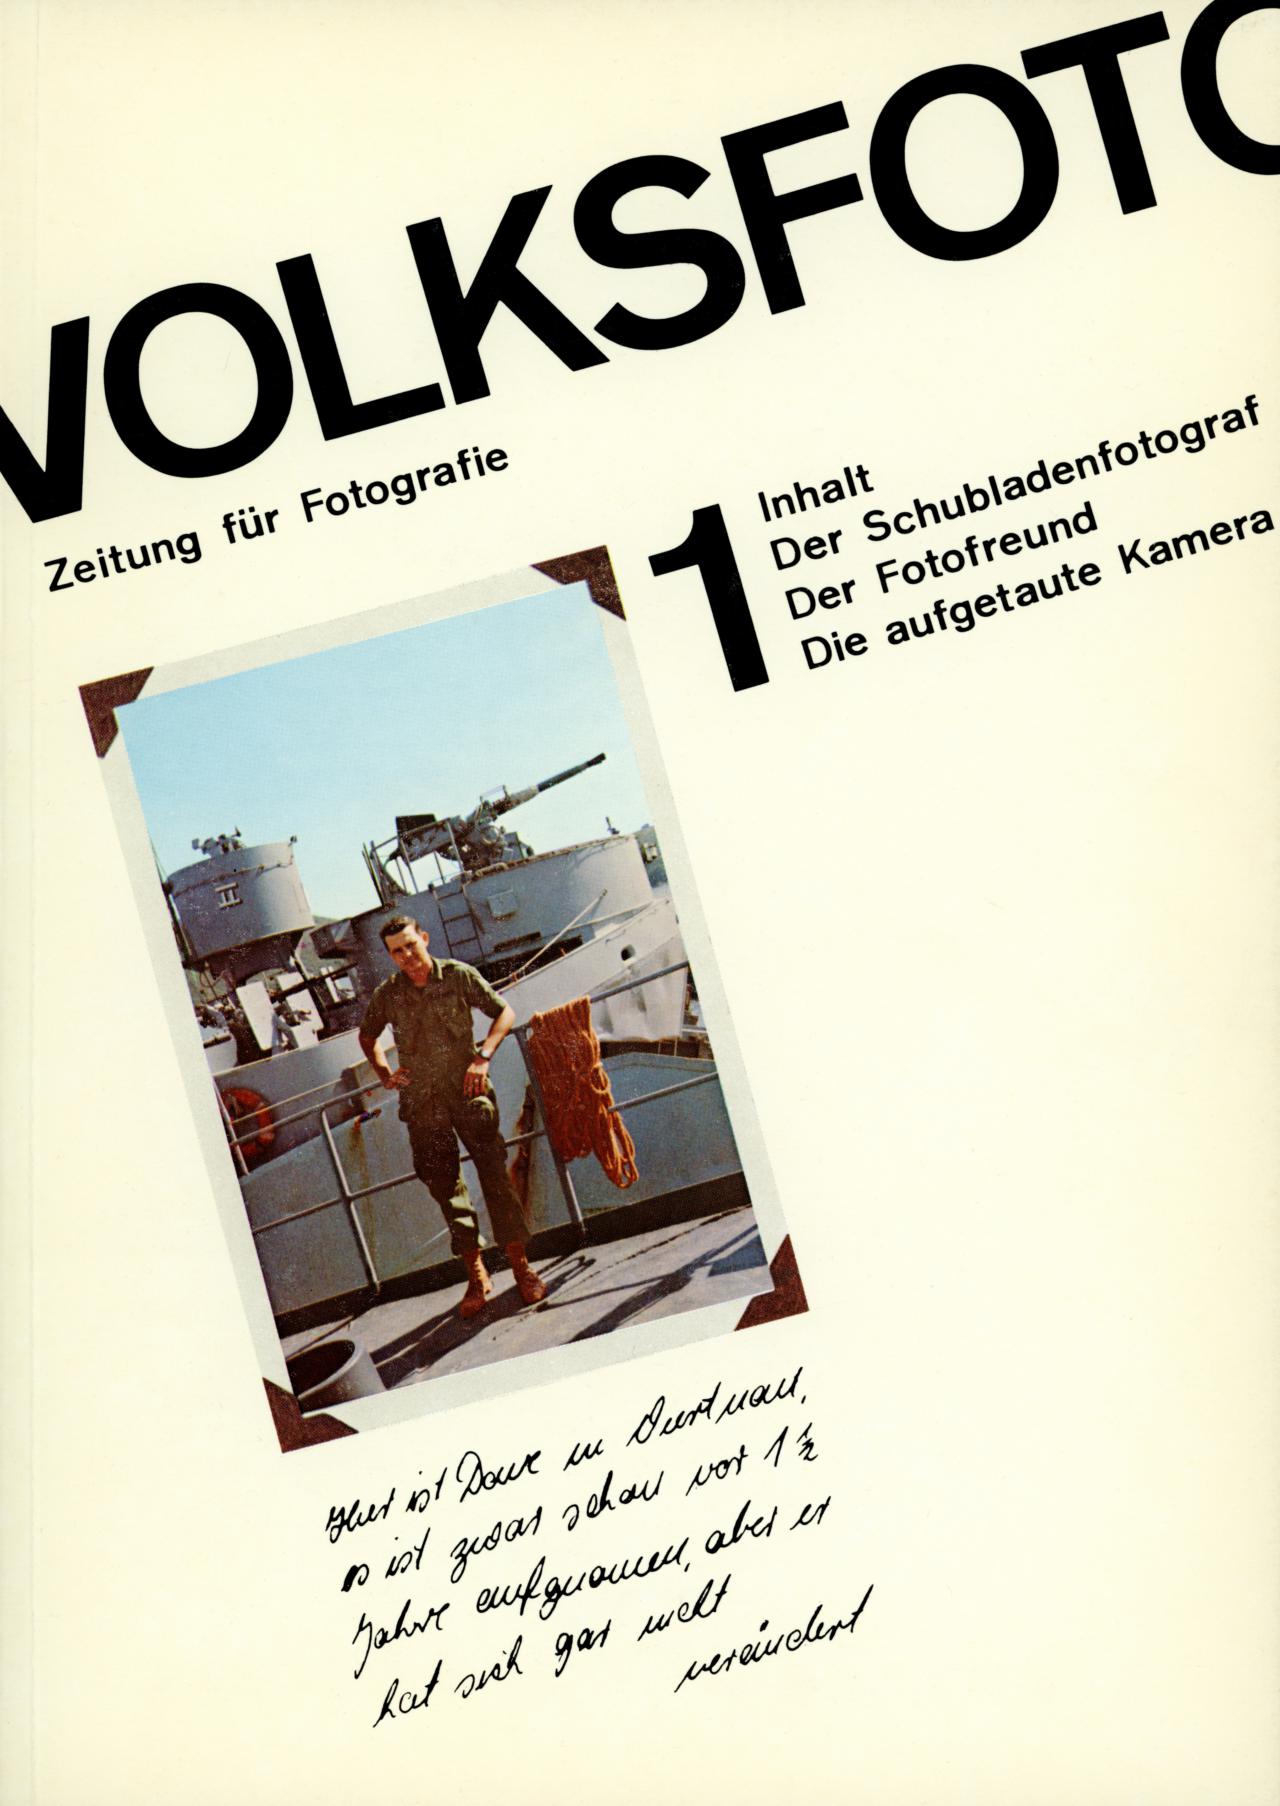 Dieter Hacker and Andreas Seltzer (ed.), folk photo. Newspaper for Photography, No. 1, 7th Producer Gallery, Berlin, 1976.